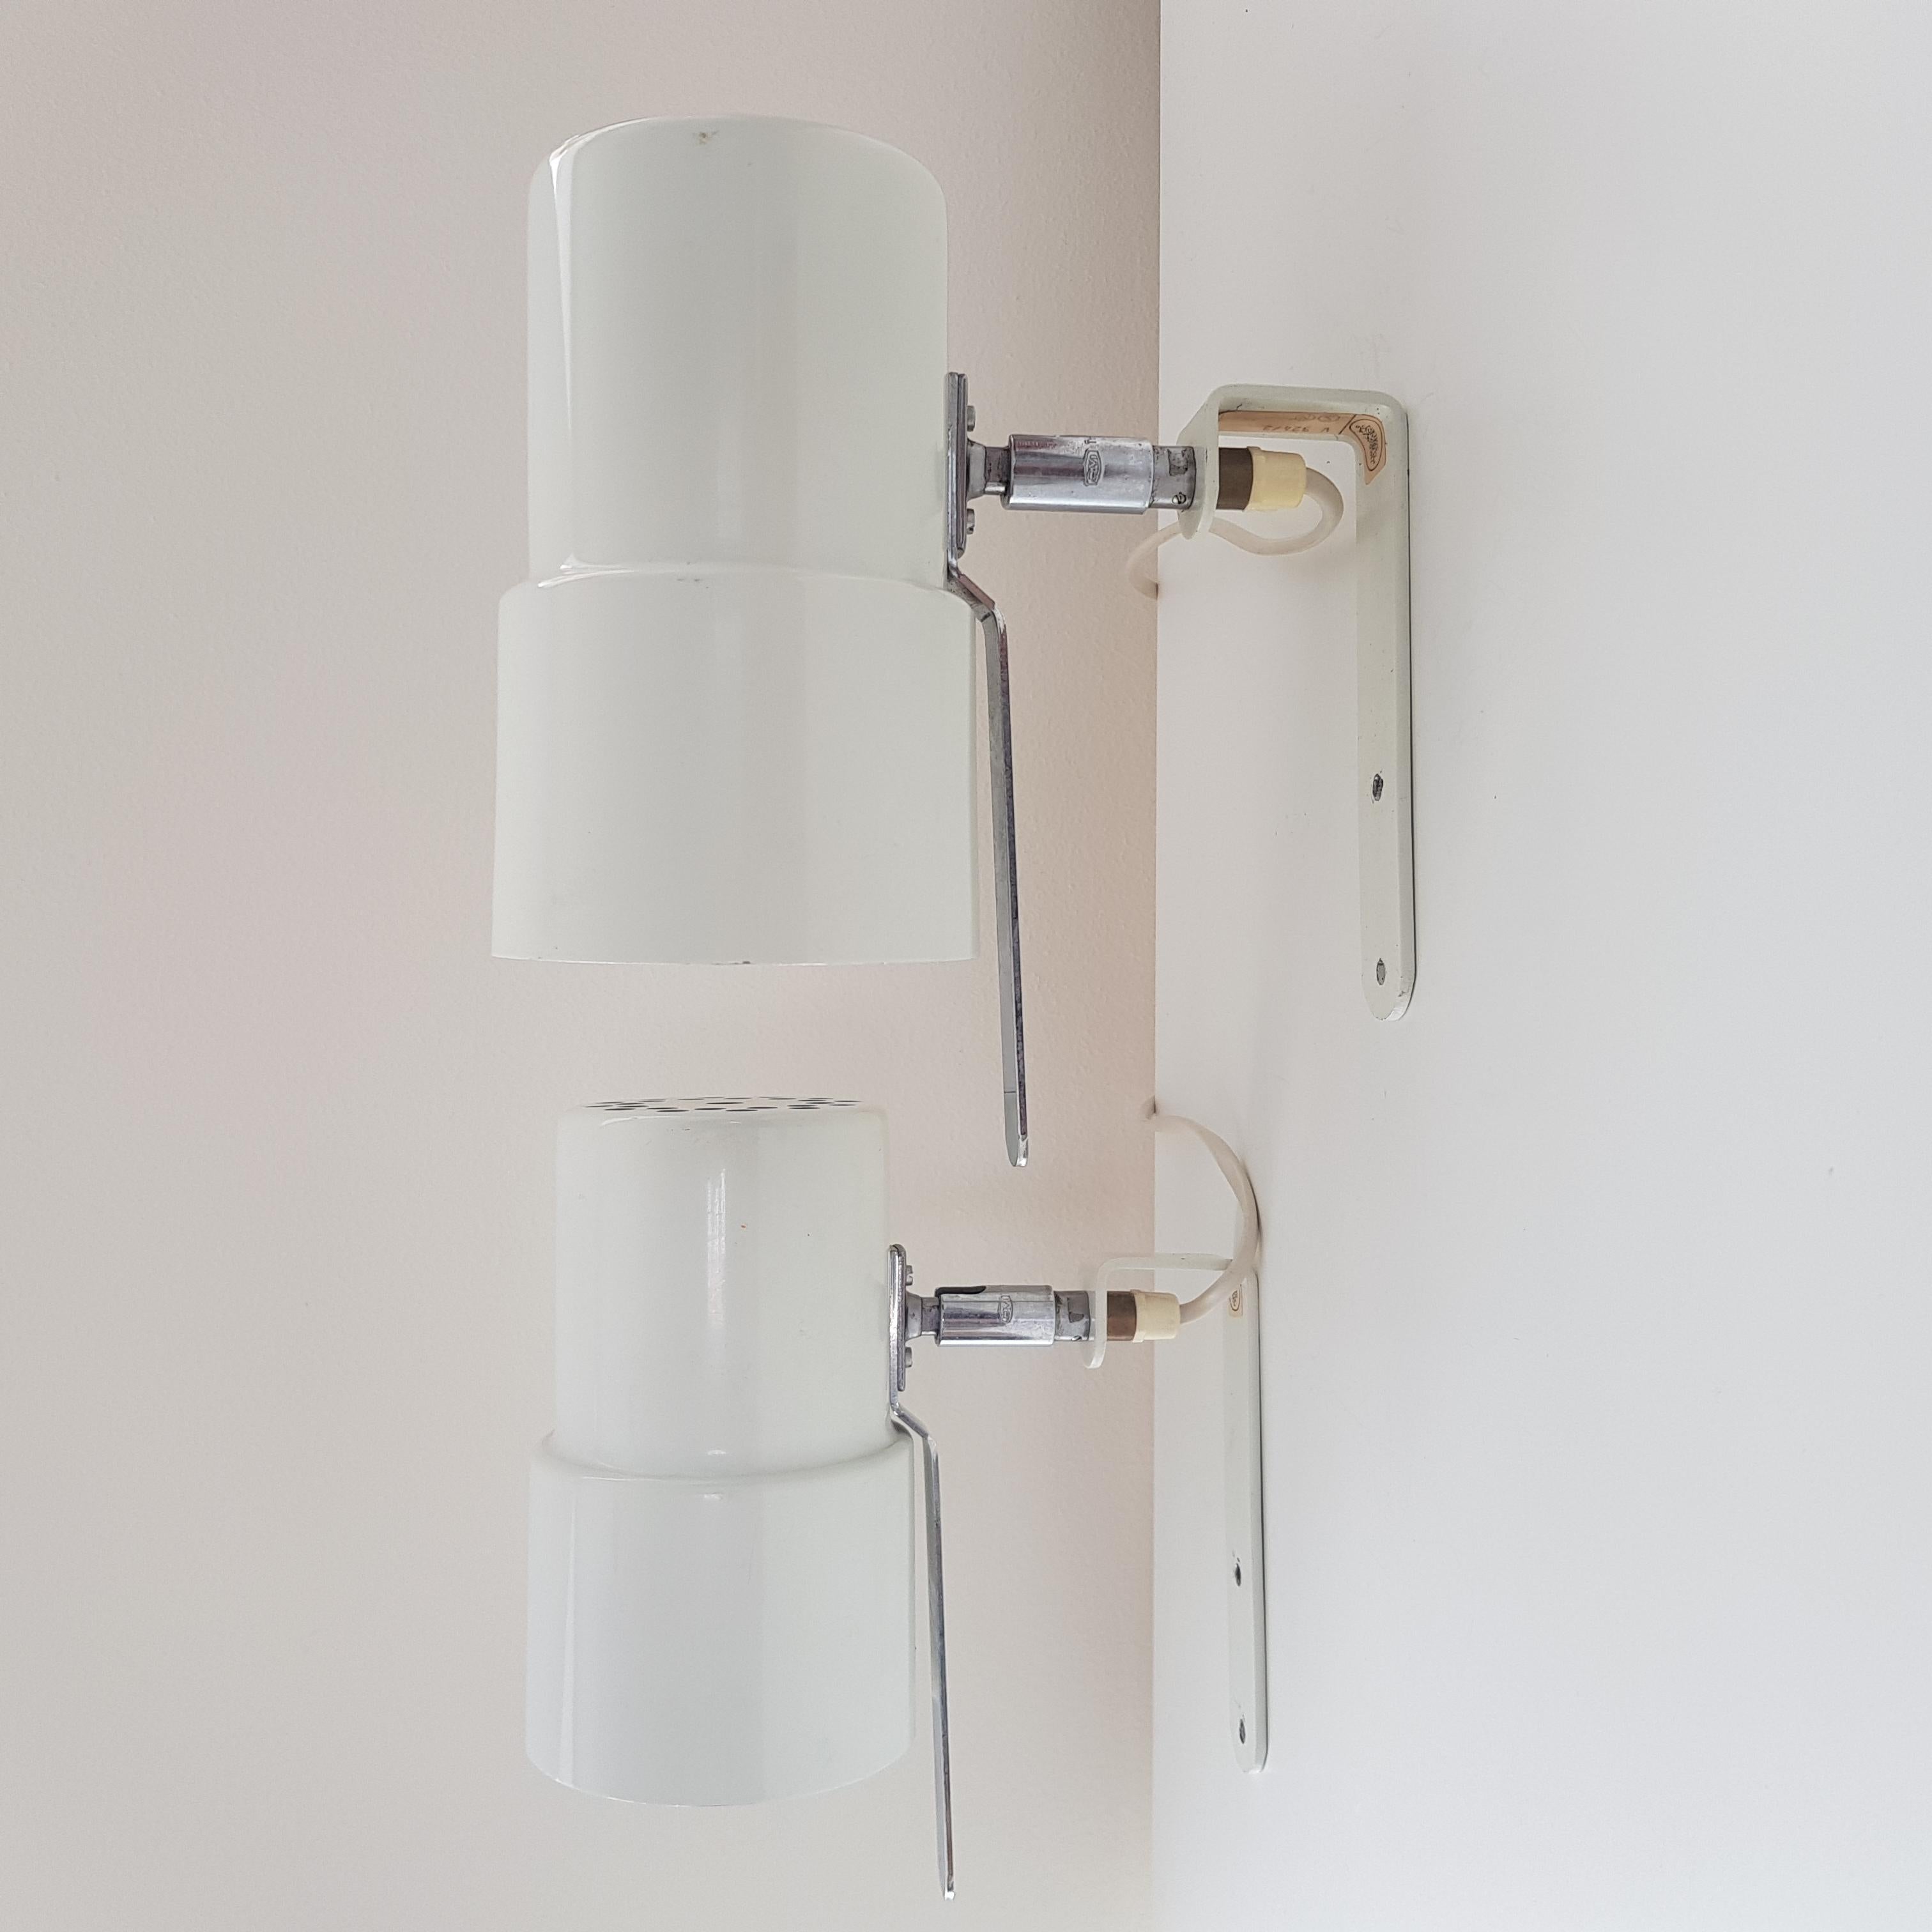 Timeless pair of wall sconces model V-324 designed by Hans-Agne Jakobsson. Sweden, 1960s

White lacquered metal with slight patina, no dents or major flaws.